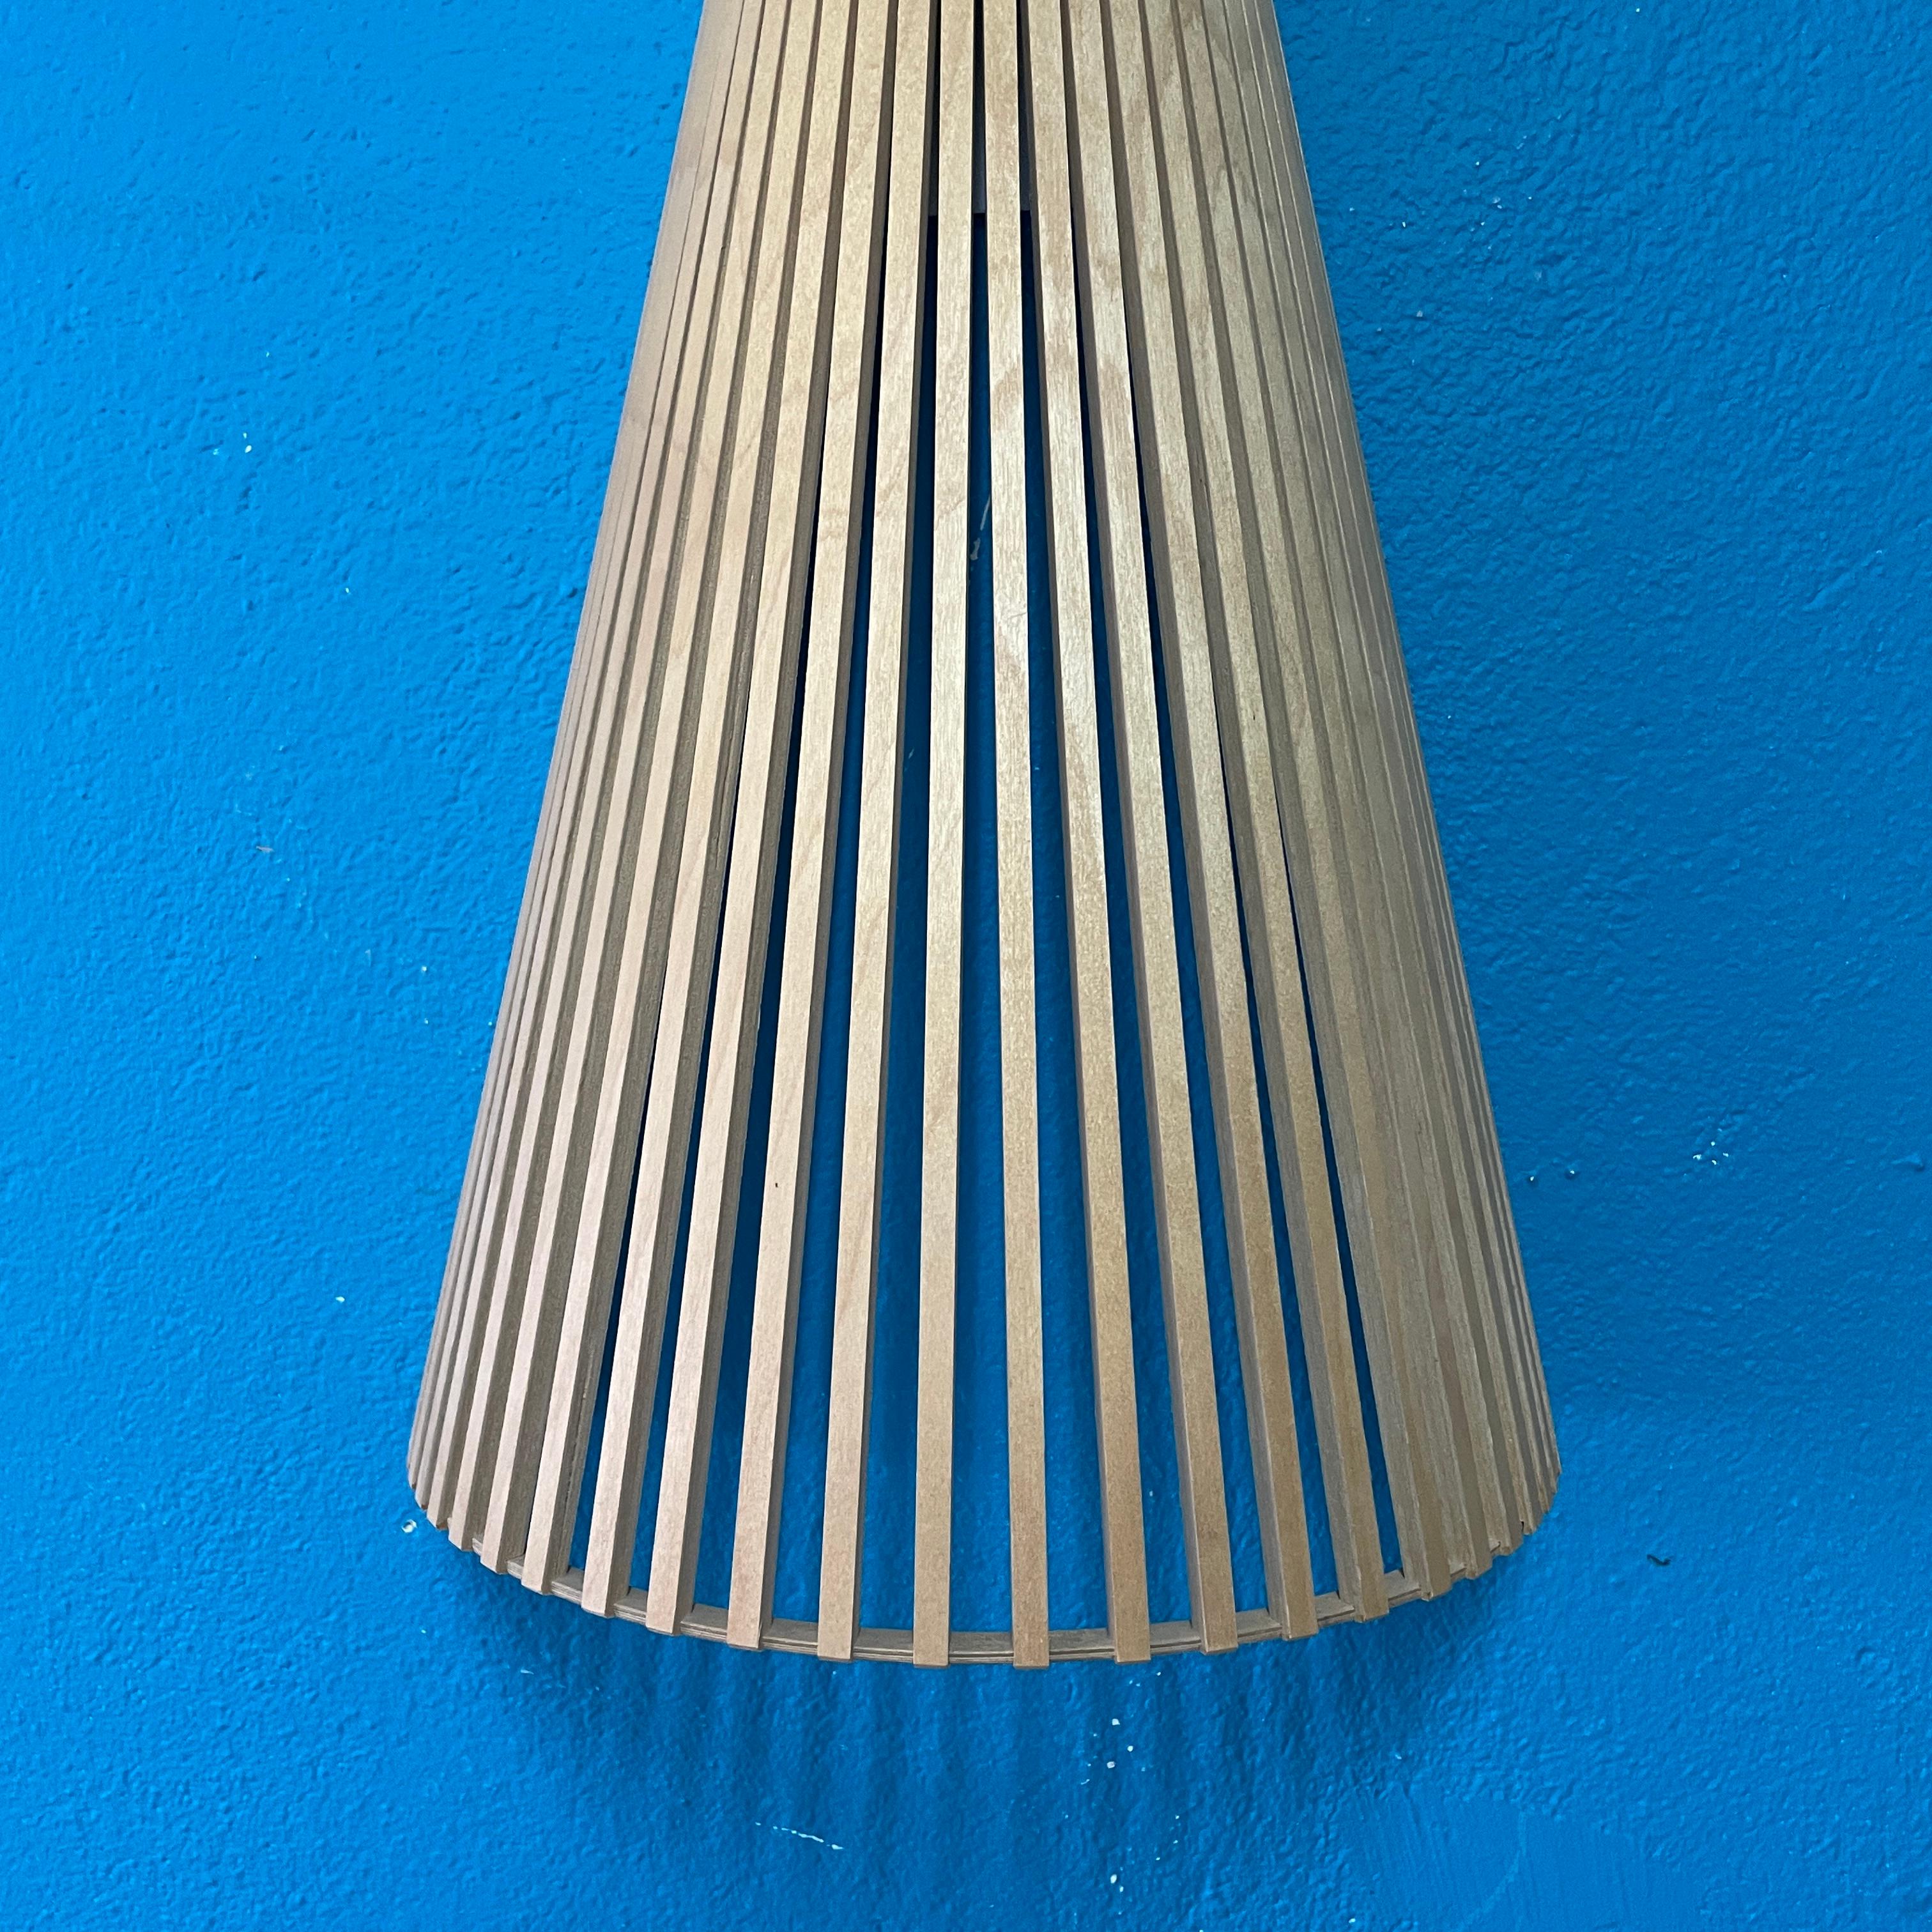 Birch Wooden Secto 4230 Wall Lamp by Secto Design Finland For Sale